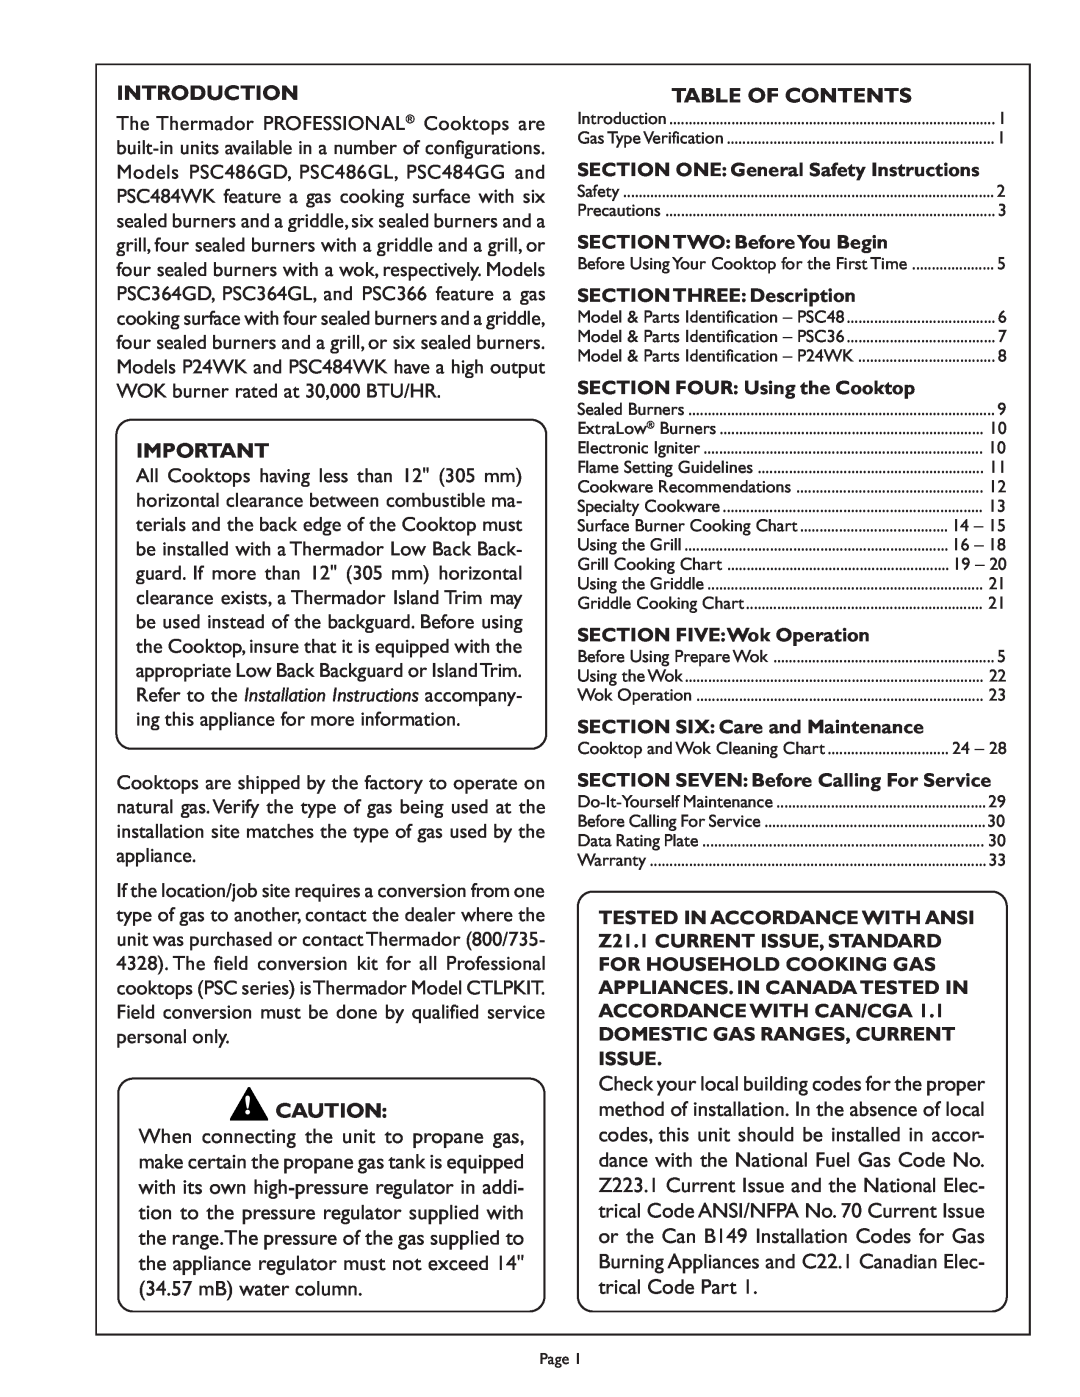 Range Kleen PSC364GD Introduction, Table Of Contents, SECTION ONE General Safety Instructions, SECTION TWO BeforeYou Begin 